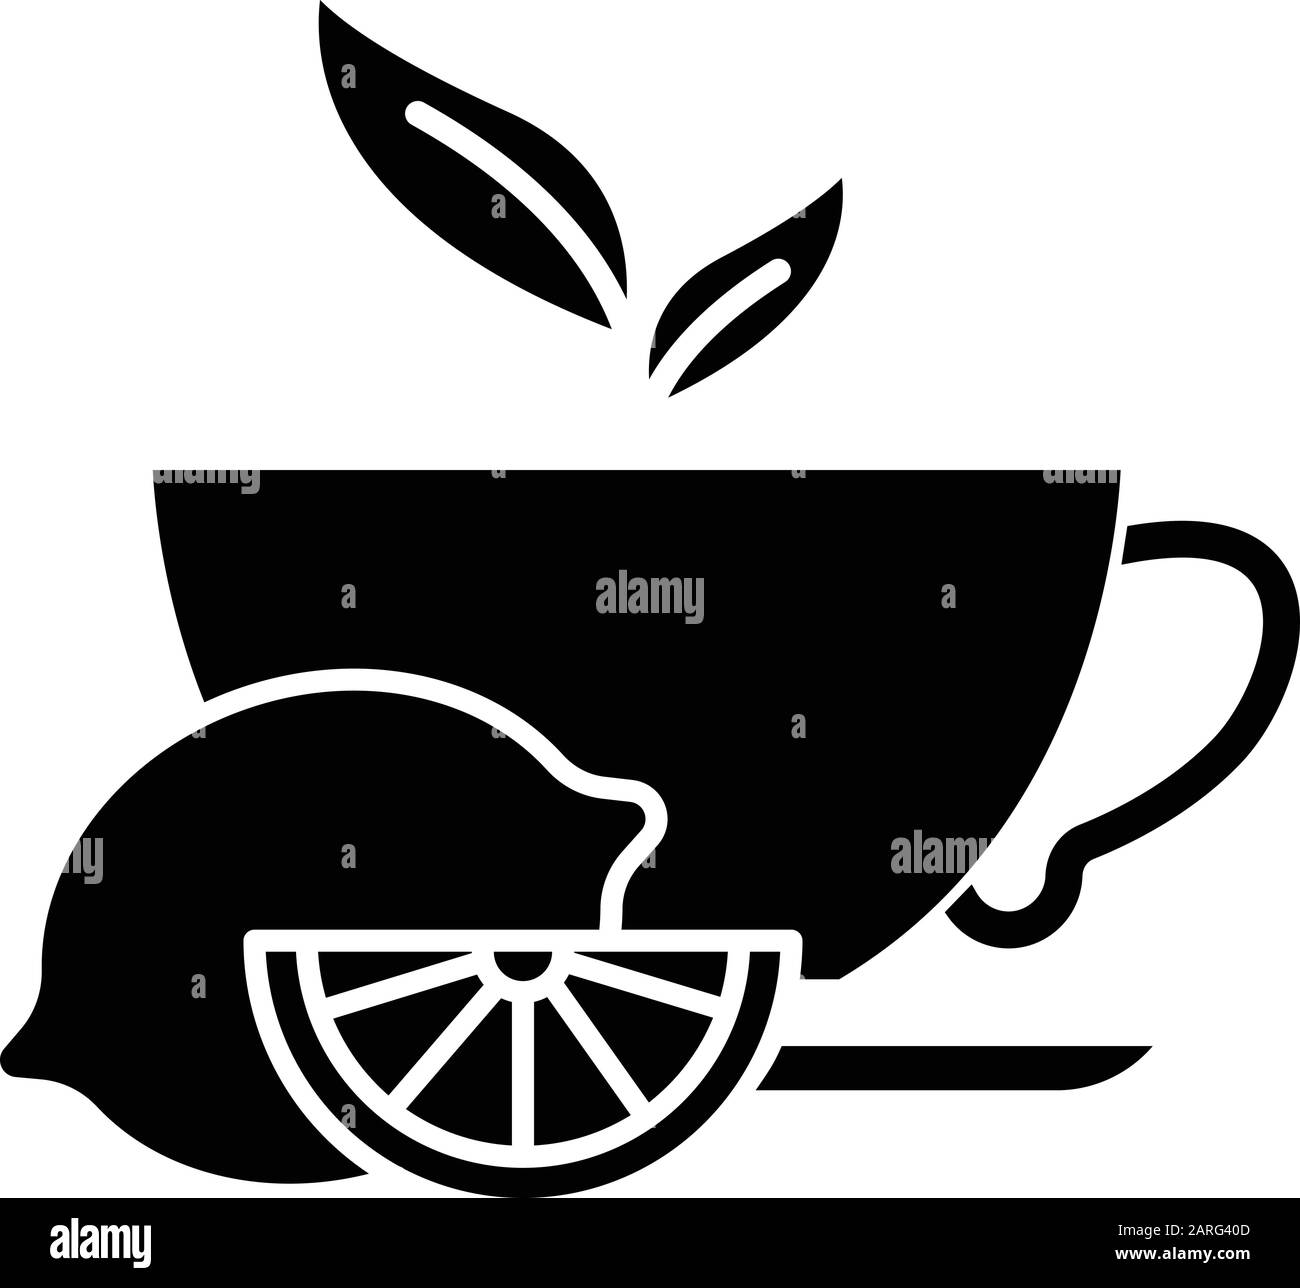 Lemon tea glyph icon. Common cold aid. Healthcare. Aromatic teacup. Hot drink in cup. Antioxidant with vitamin C. Beverage to relax. Silhouette symbol Stock Vector